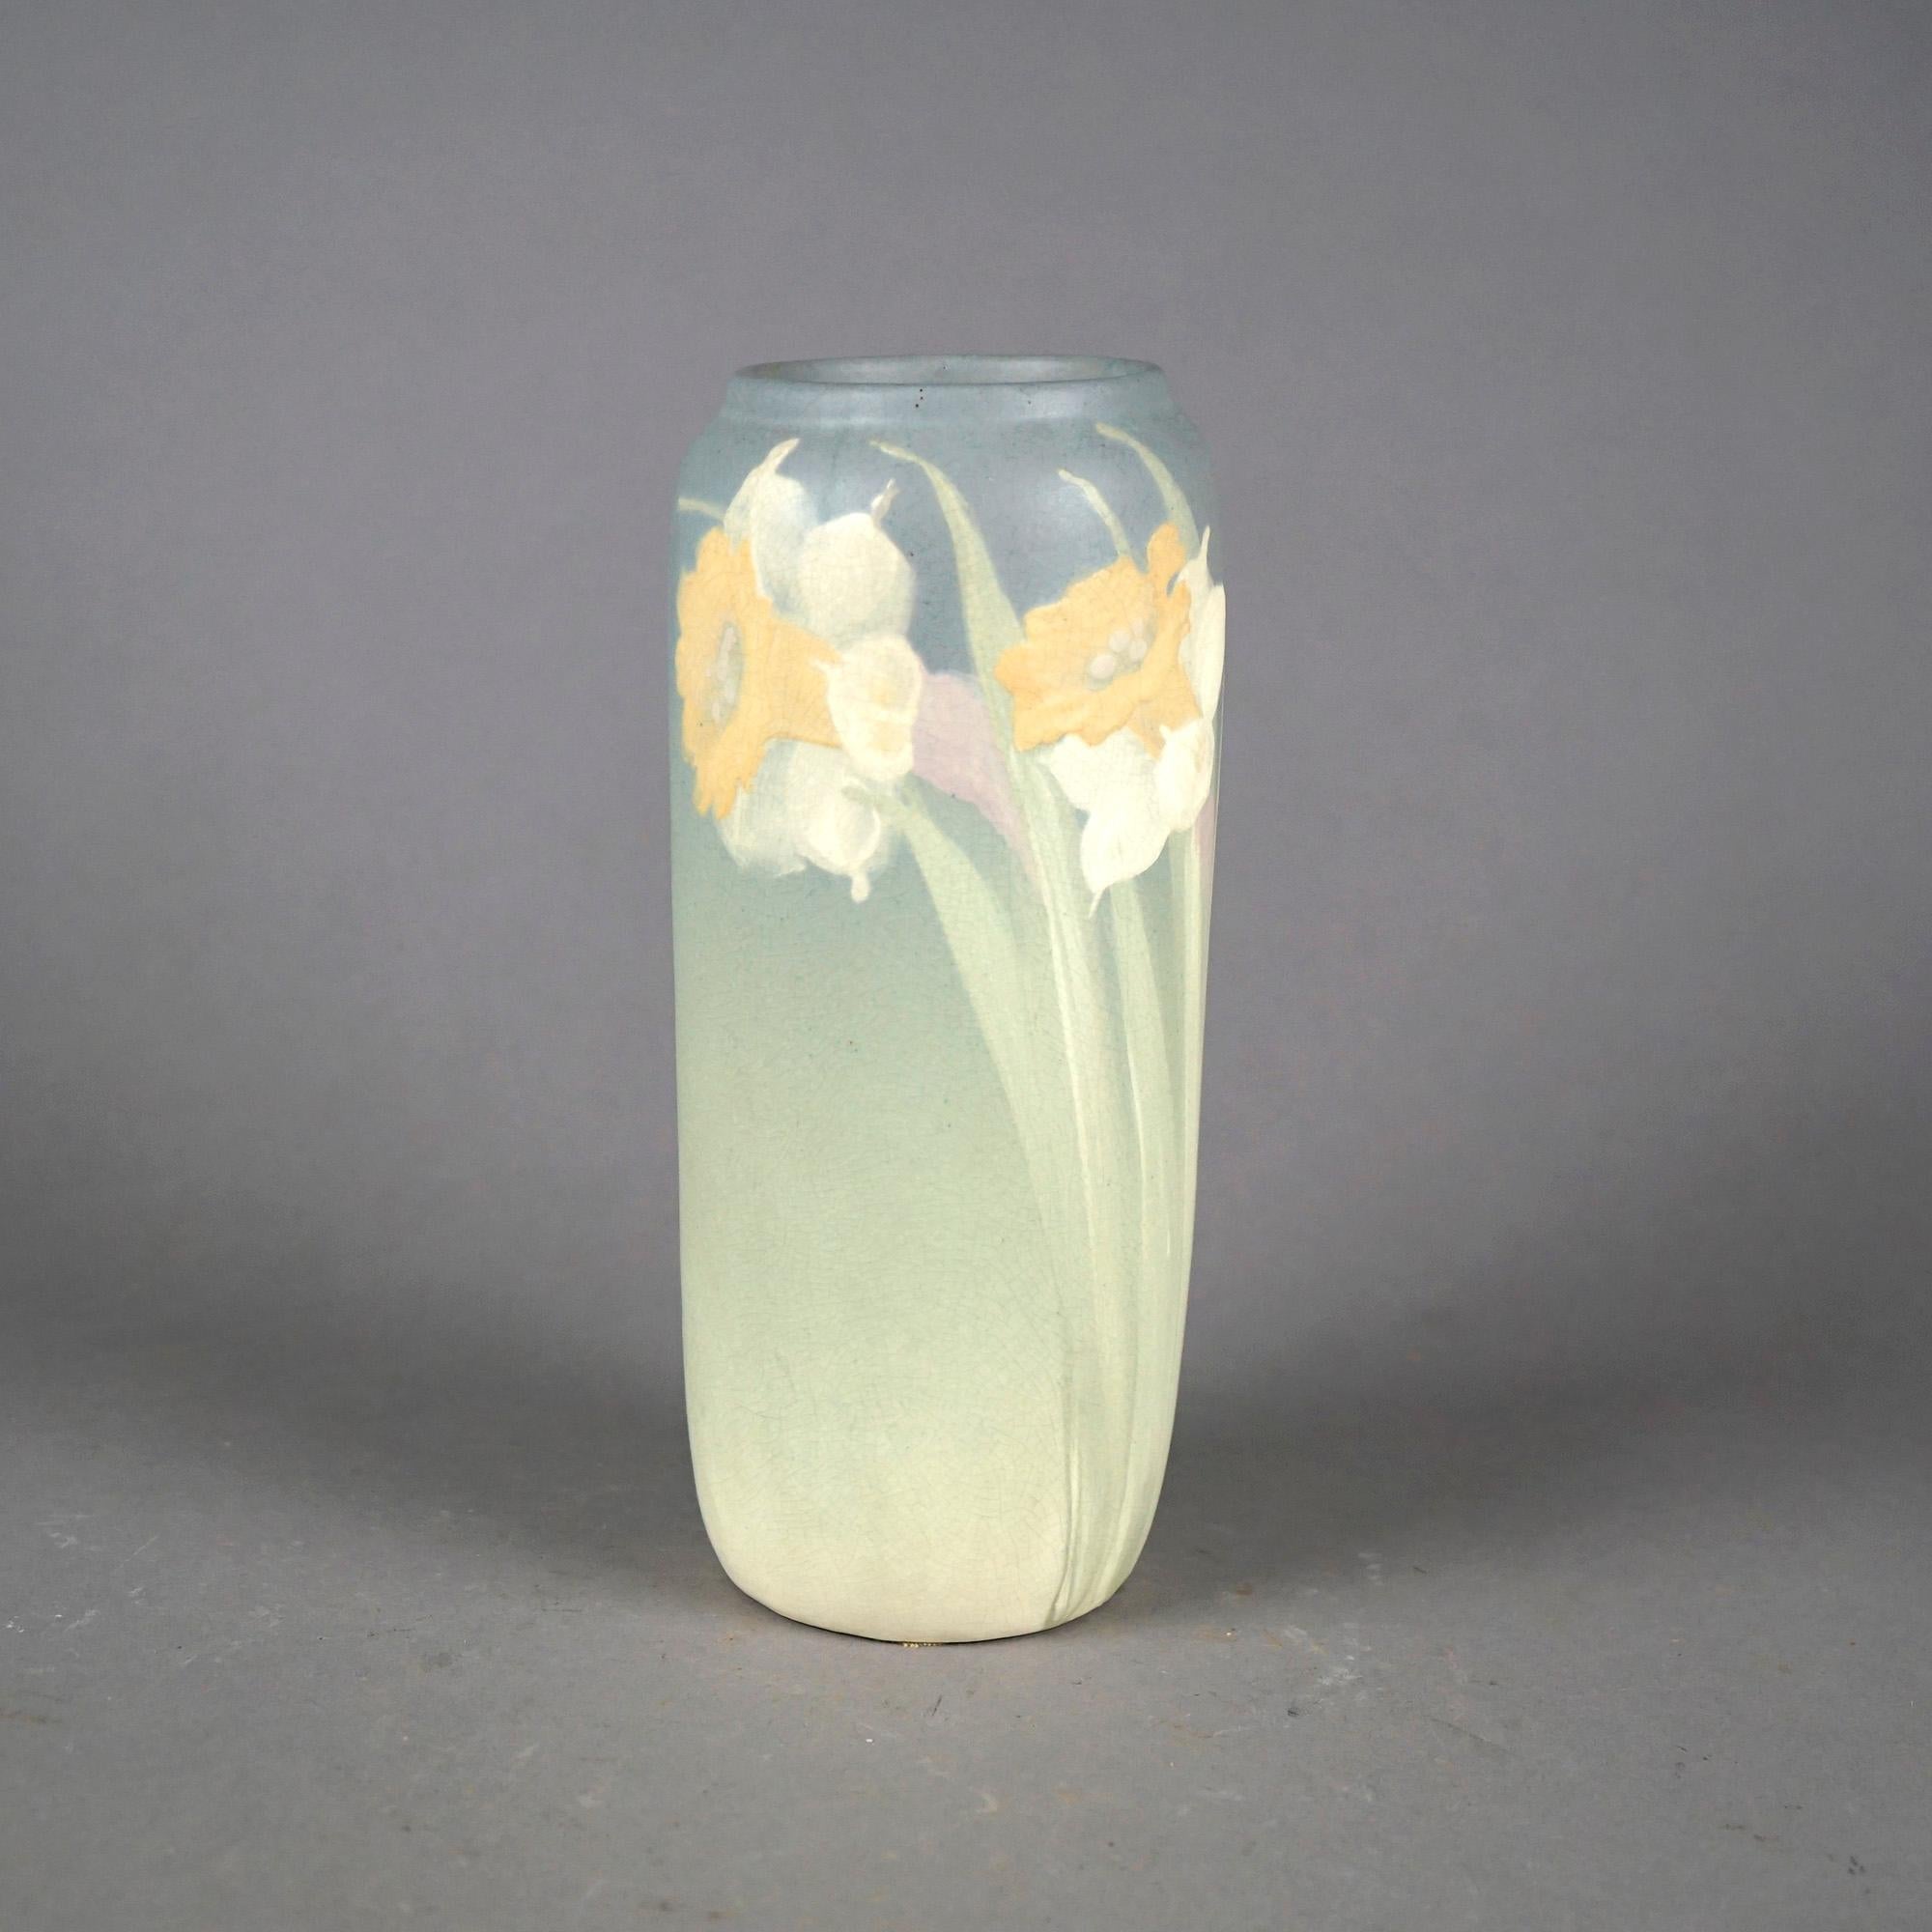 An antique Weller Hudson vase offers art pottery construction in cylinder form with hand painted daffodils, maker mark on base as photographed, c1920

Measures- 9.5''H x 4''W x 4''D

Catalogue Note: Ask about DISCOUNTED DELIVERY RATES available to